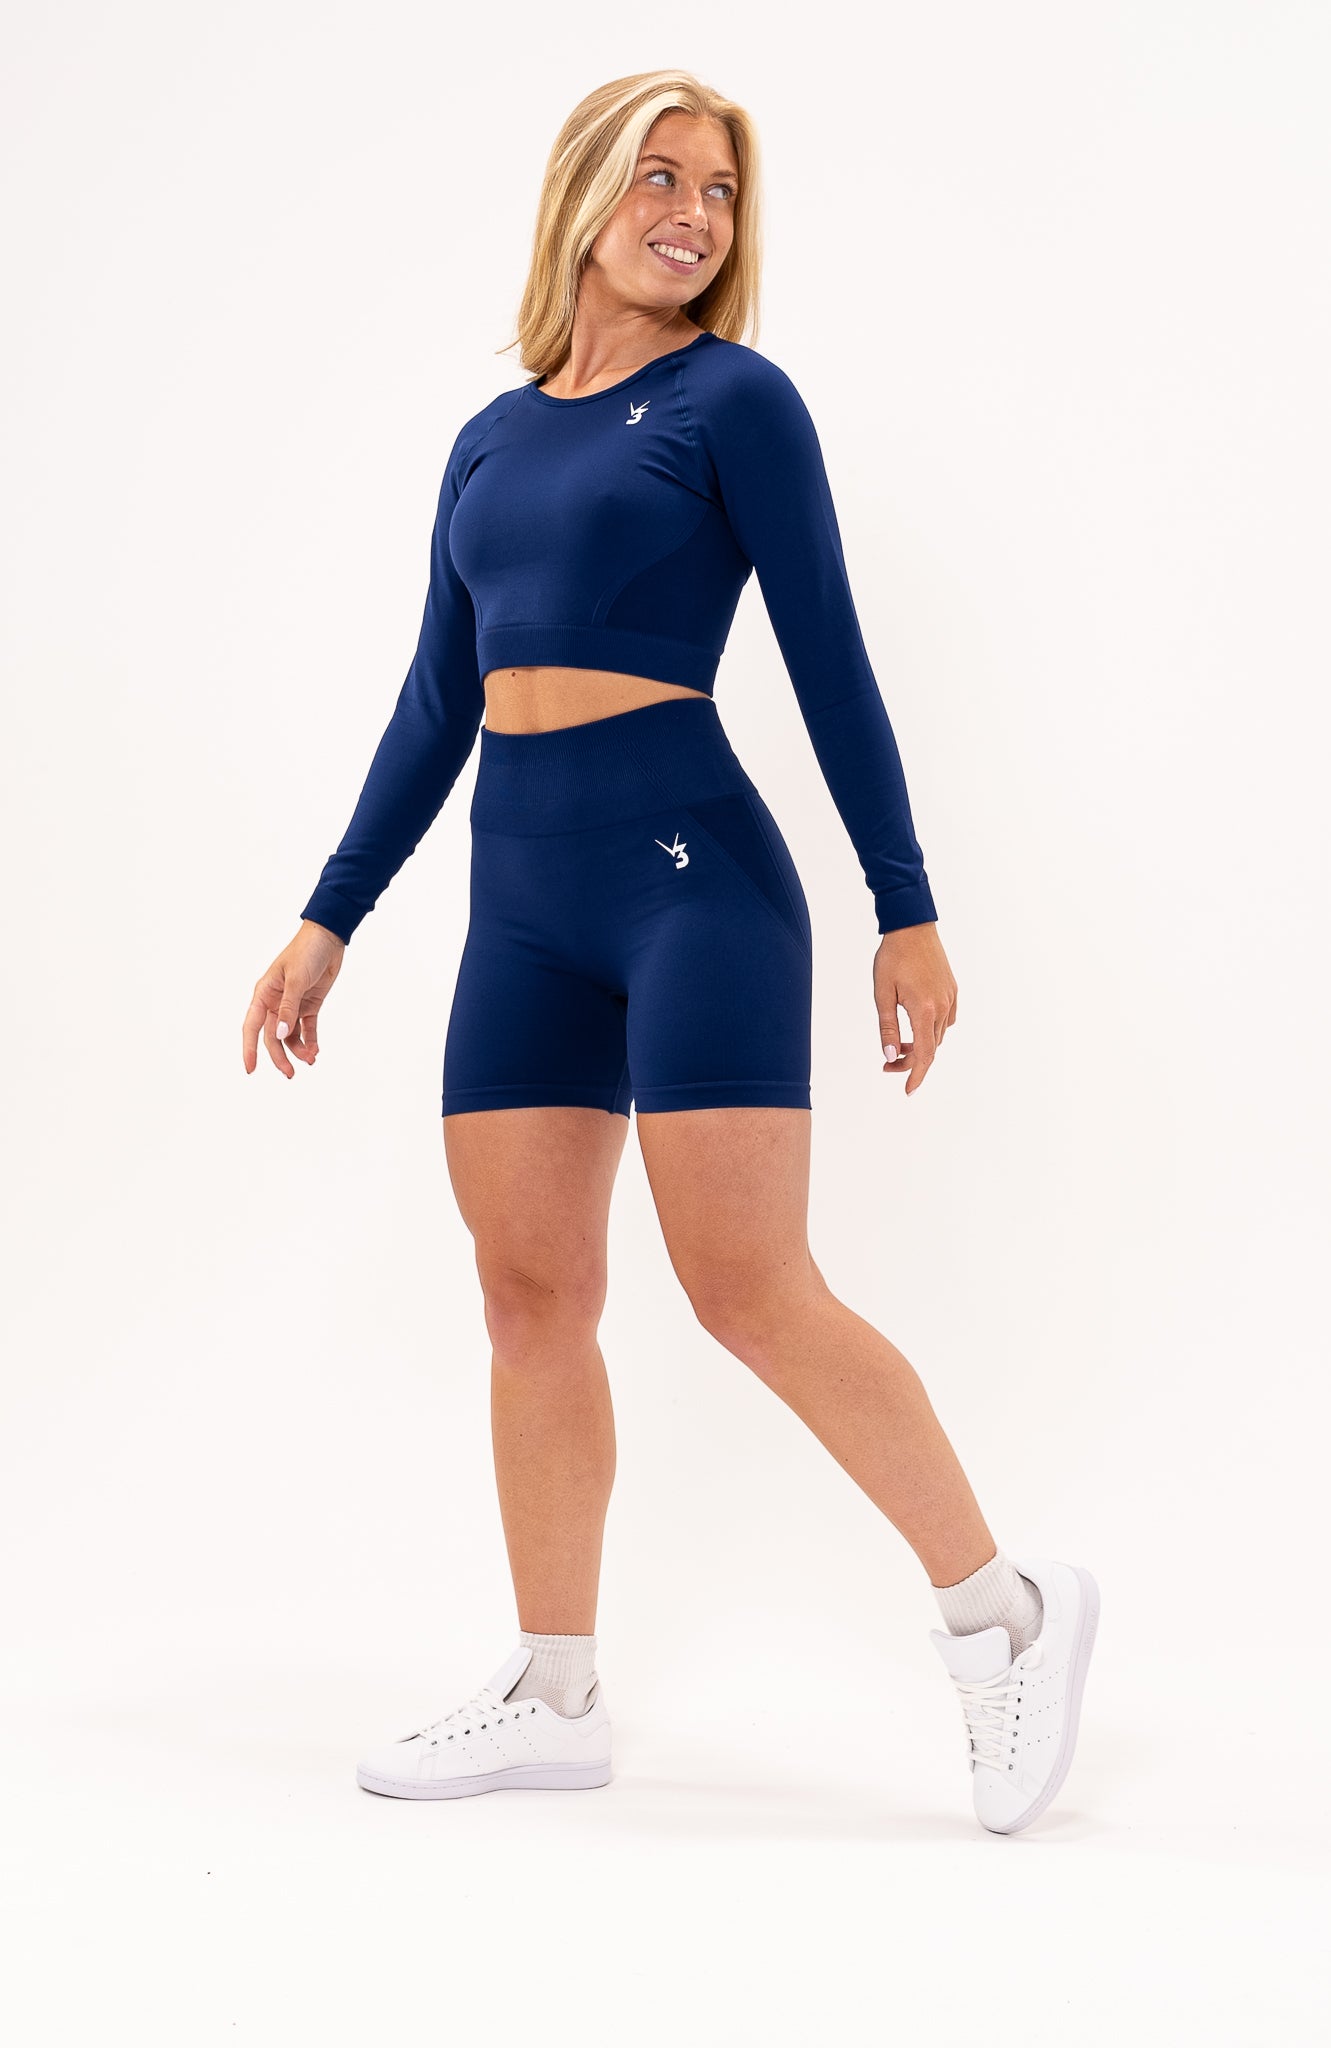 redbaysand Women's Tempo seamless long sleeve cropped training top in navy royal blue with thumb hole long sleeves and crop fit for gym workouts training, Running, yoga, bodybuilding and bikini fitness.